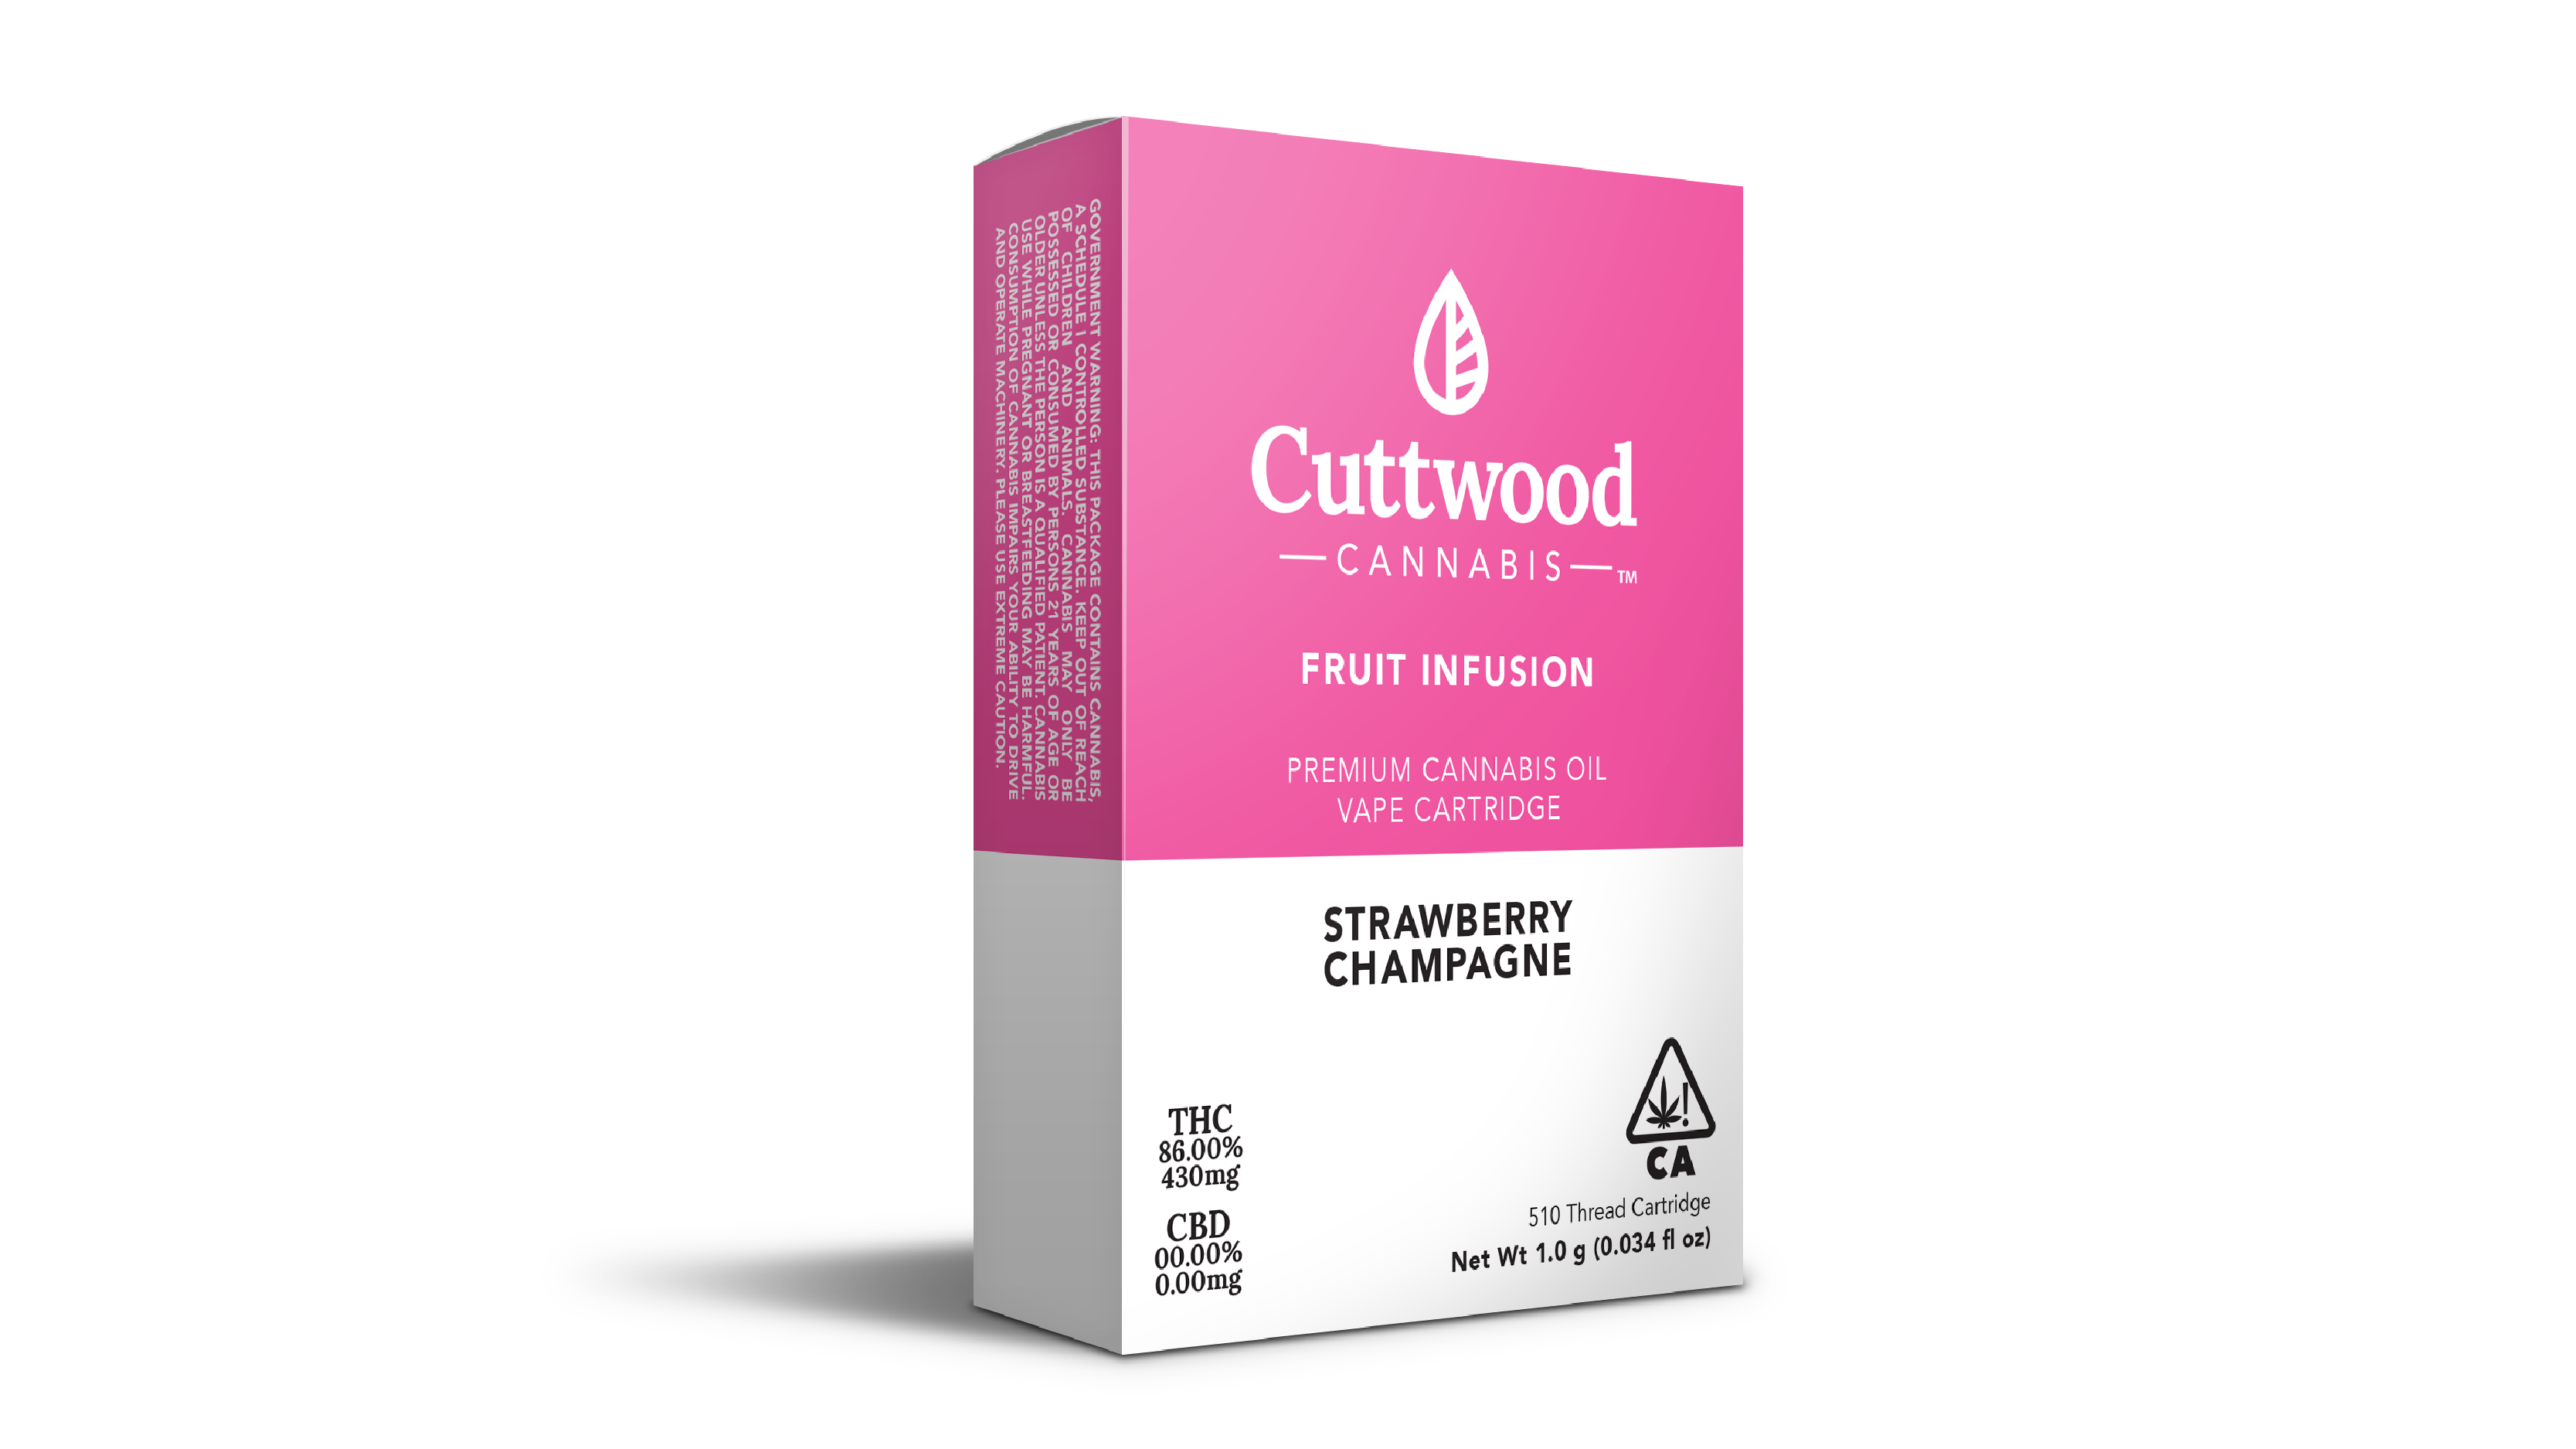 Core Cuttwood Mockup Images-07